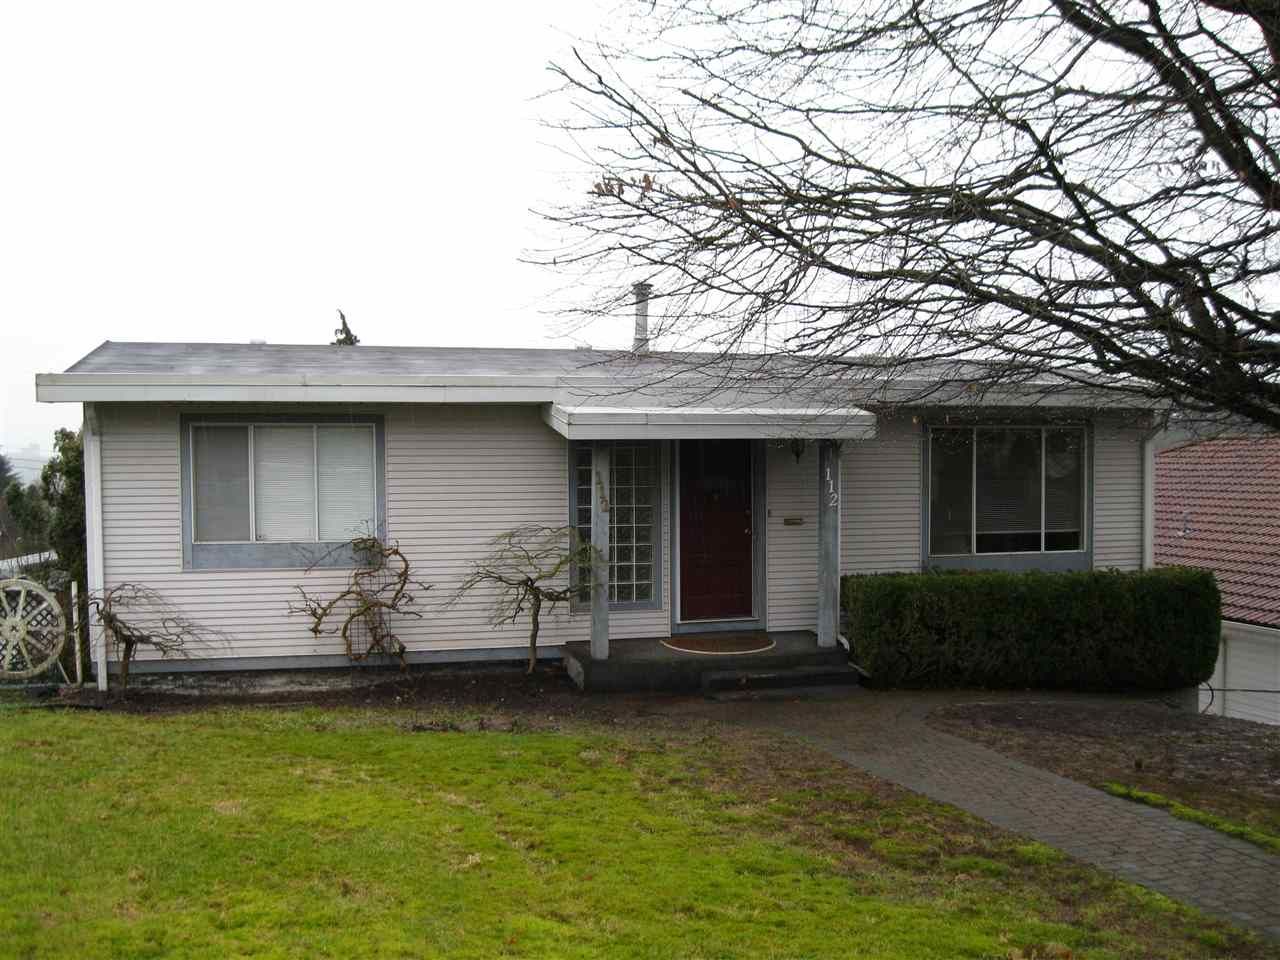 Main Photo: 112 E DURHAM STREET in New Westminster: The Heights NW House for sale : MLS®# R2035352